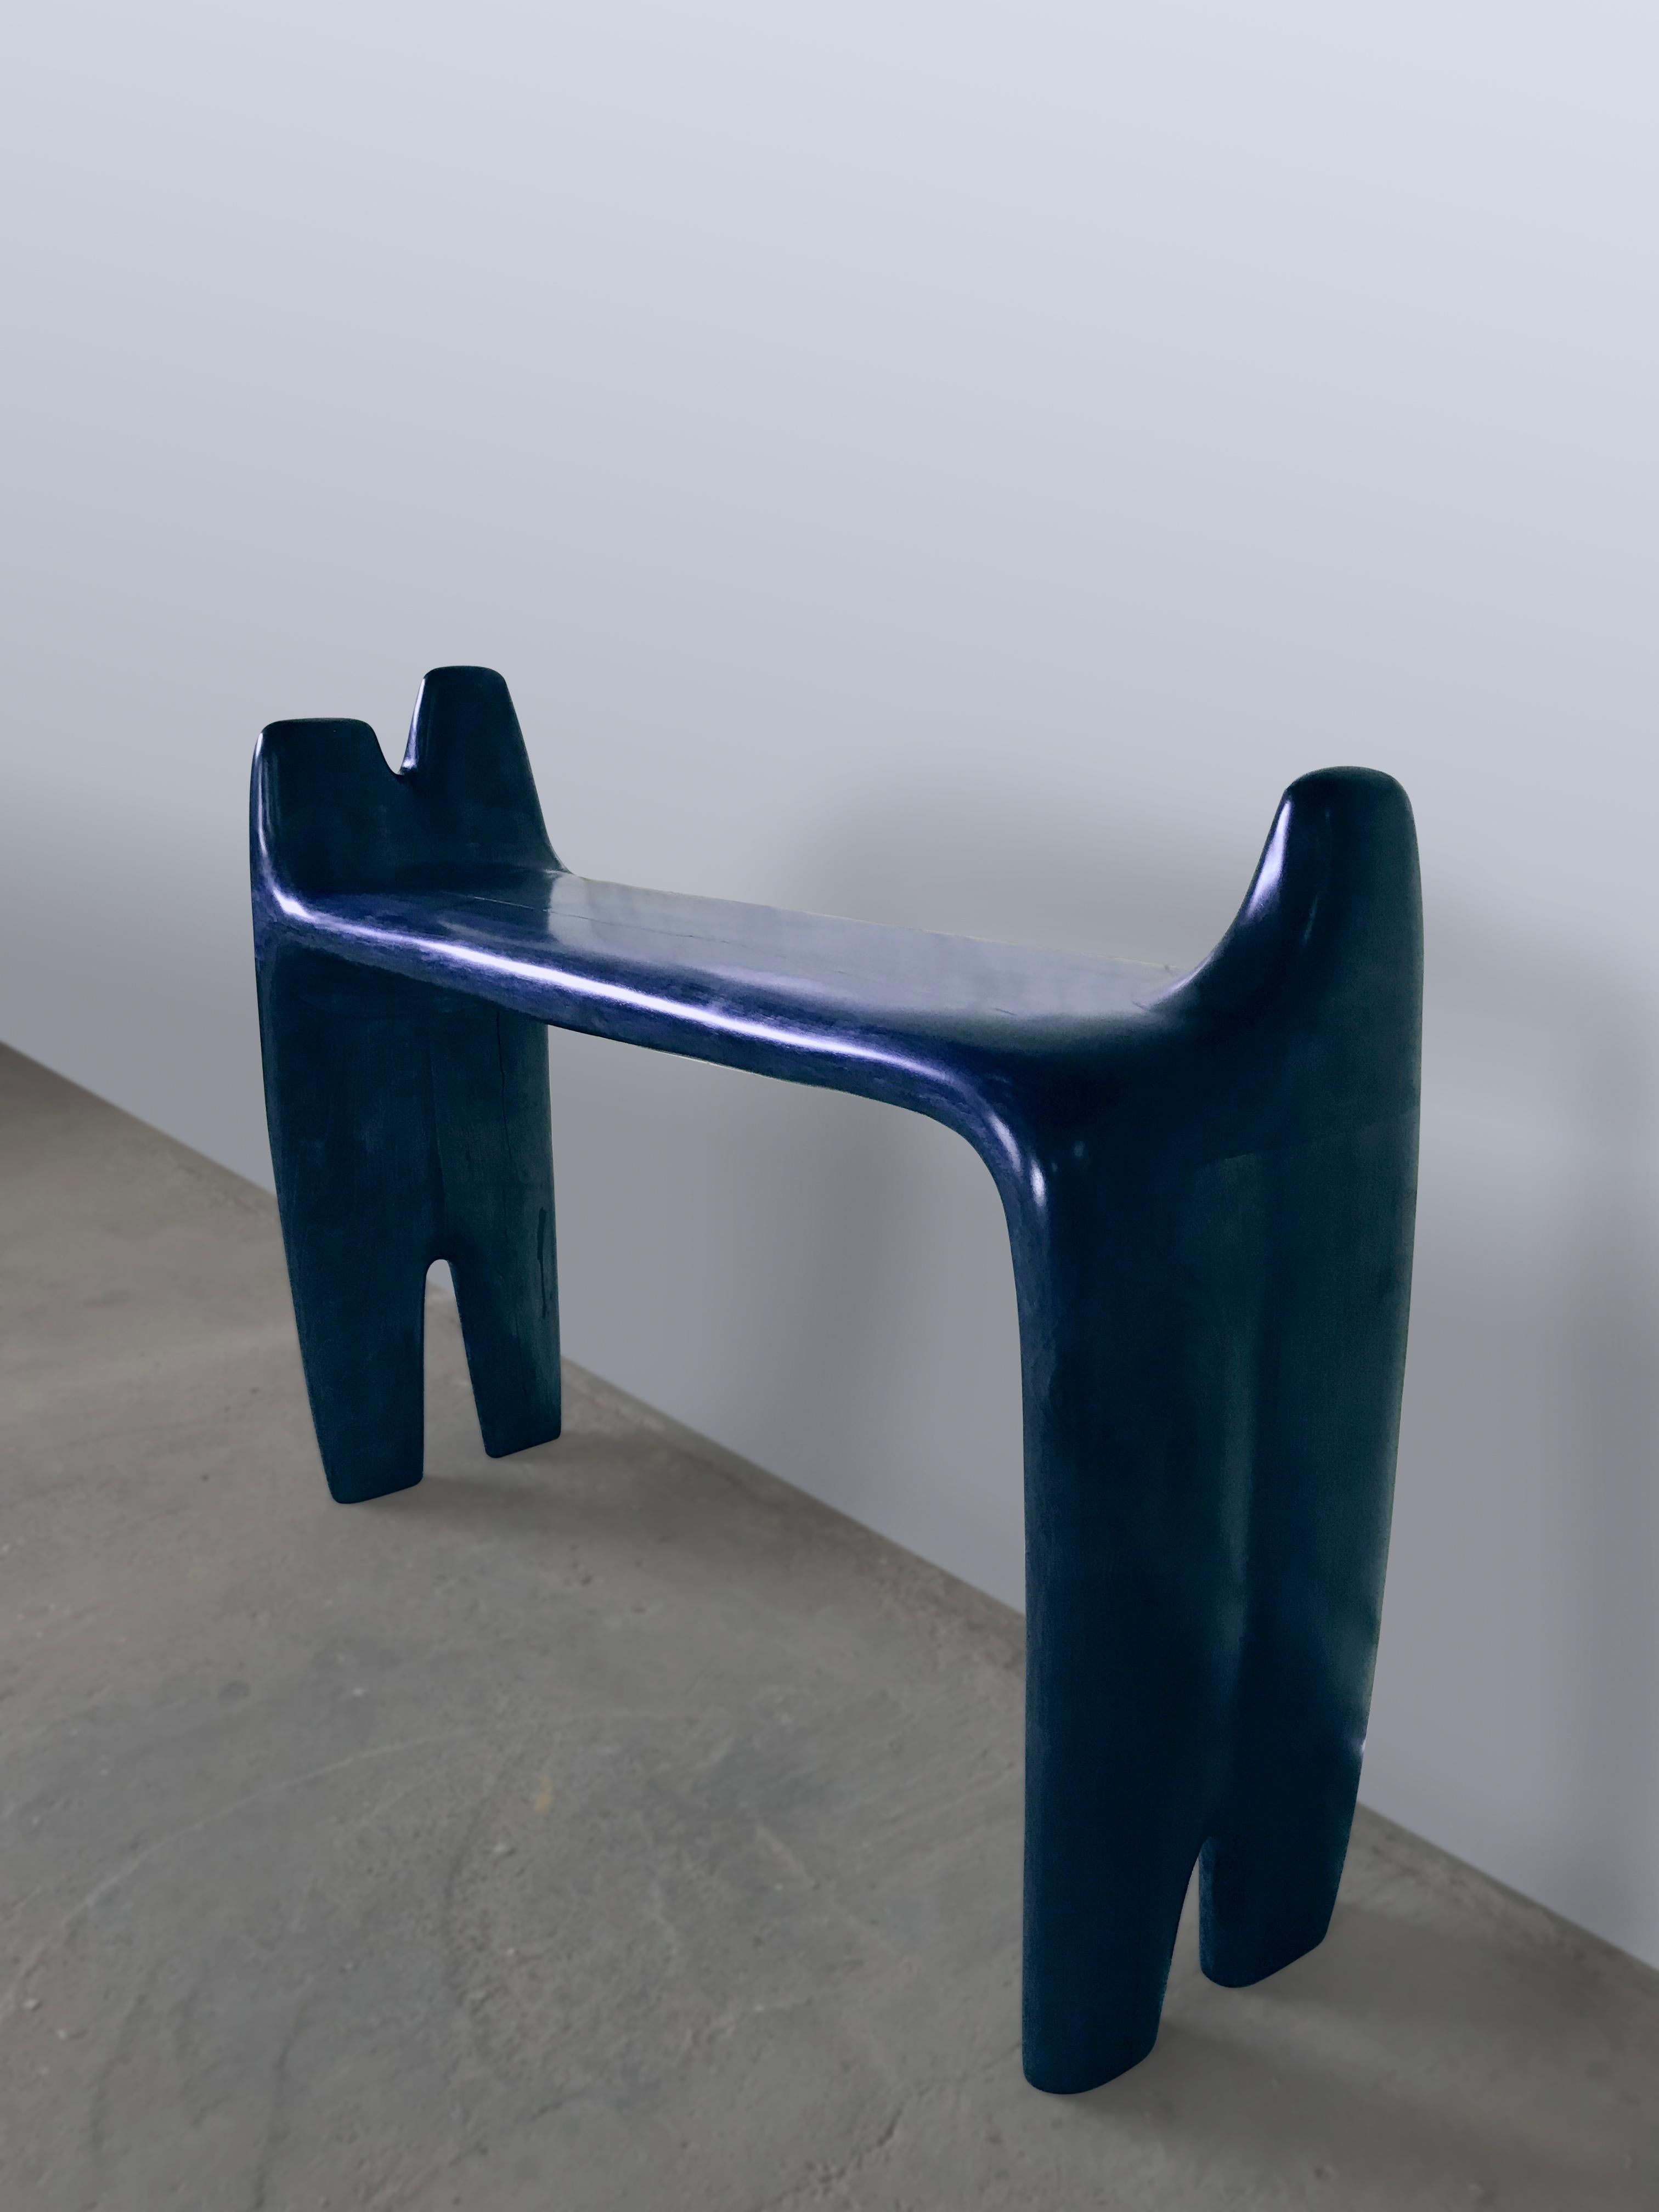 Jordi Sarrate is a product designer and sculptor based in Barcelona, Spain, and the third generation of furniture makers in his family.

The gallery presents 'Jeans' collection sculpted on Iberian walnut wood and finished with indigo blue patina.